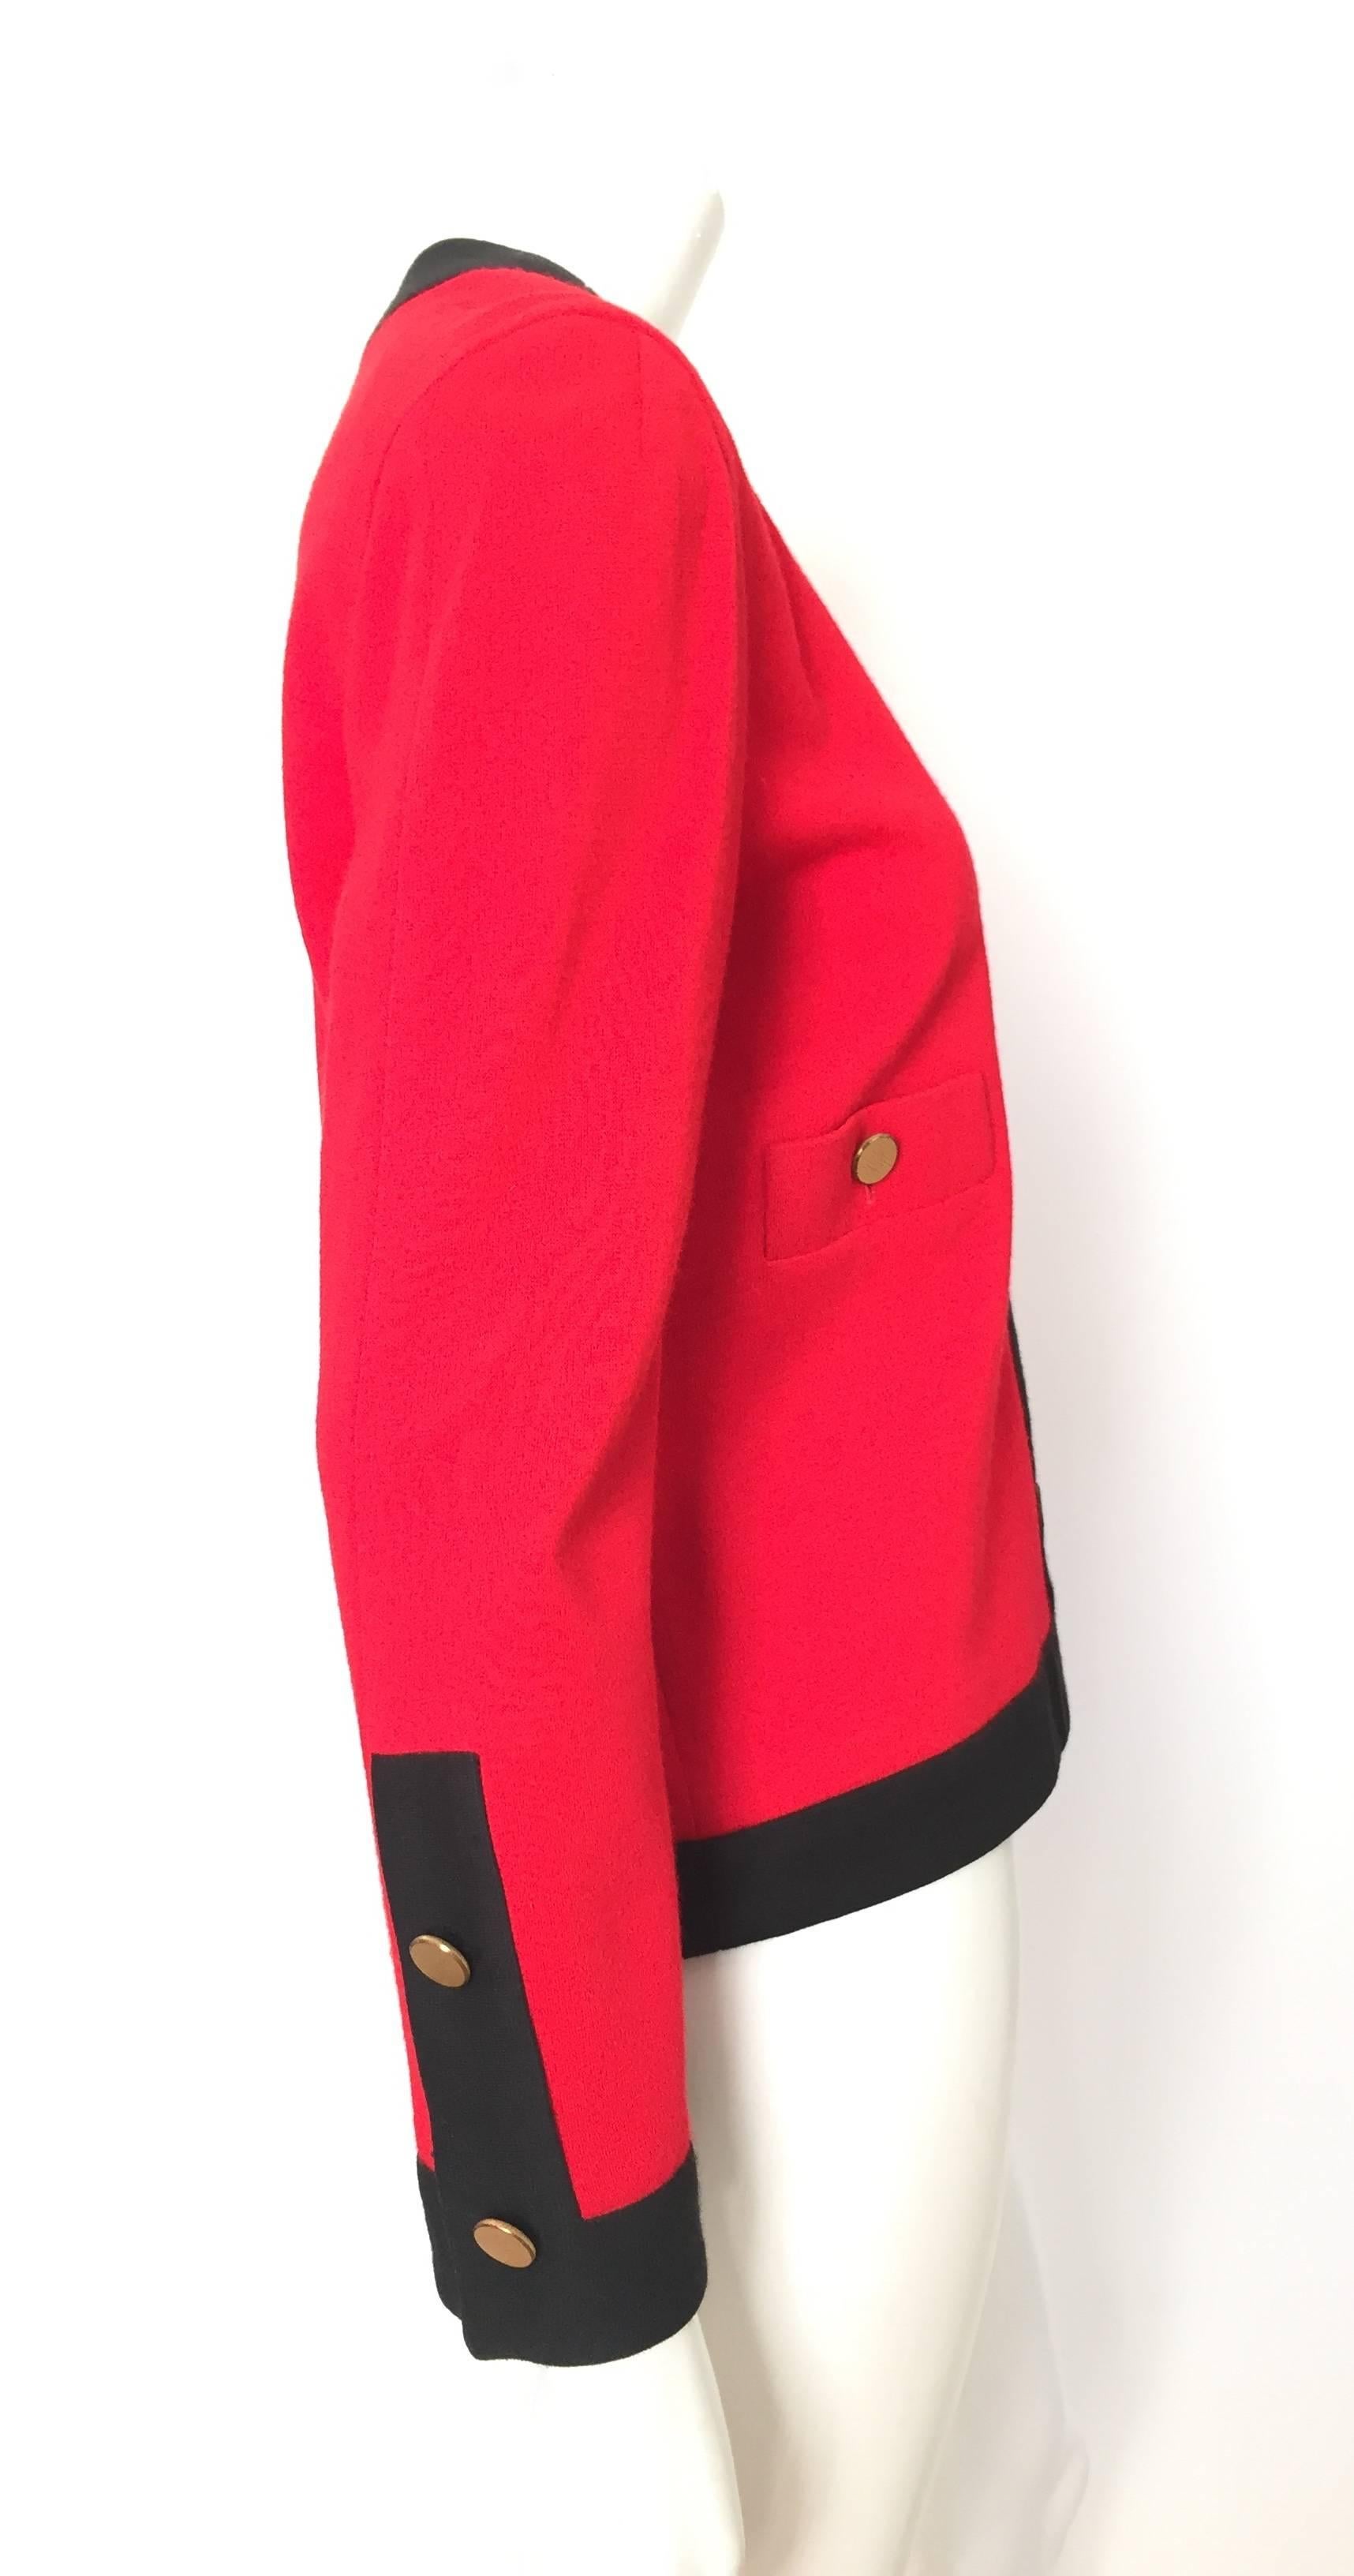 Carven Boutique Paris 1960s fire engine red with black trim and gold buttons is a vintage French size 8 / 40 but fits like a modern USA size 6 but please see & use the measurements below so you can properly measure your body to make certain this